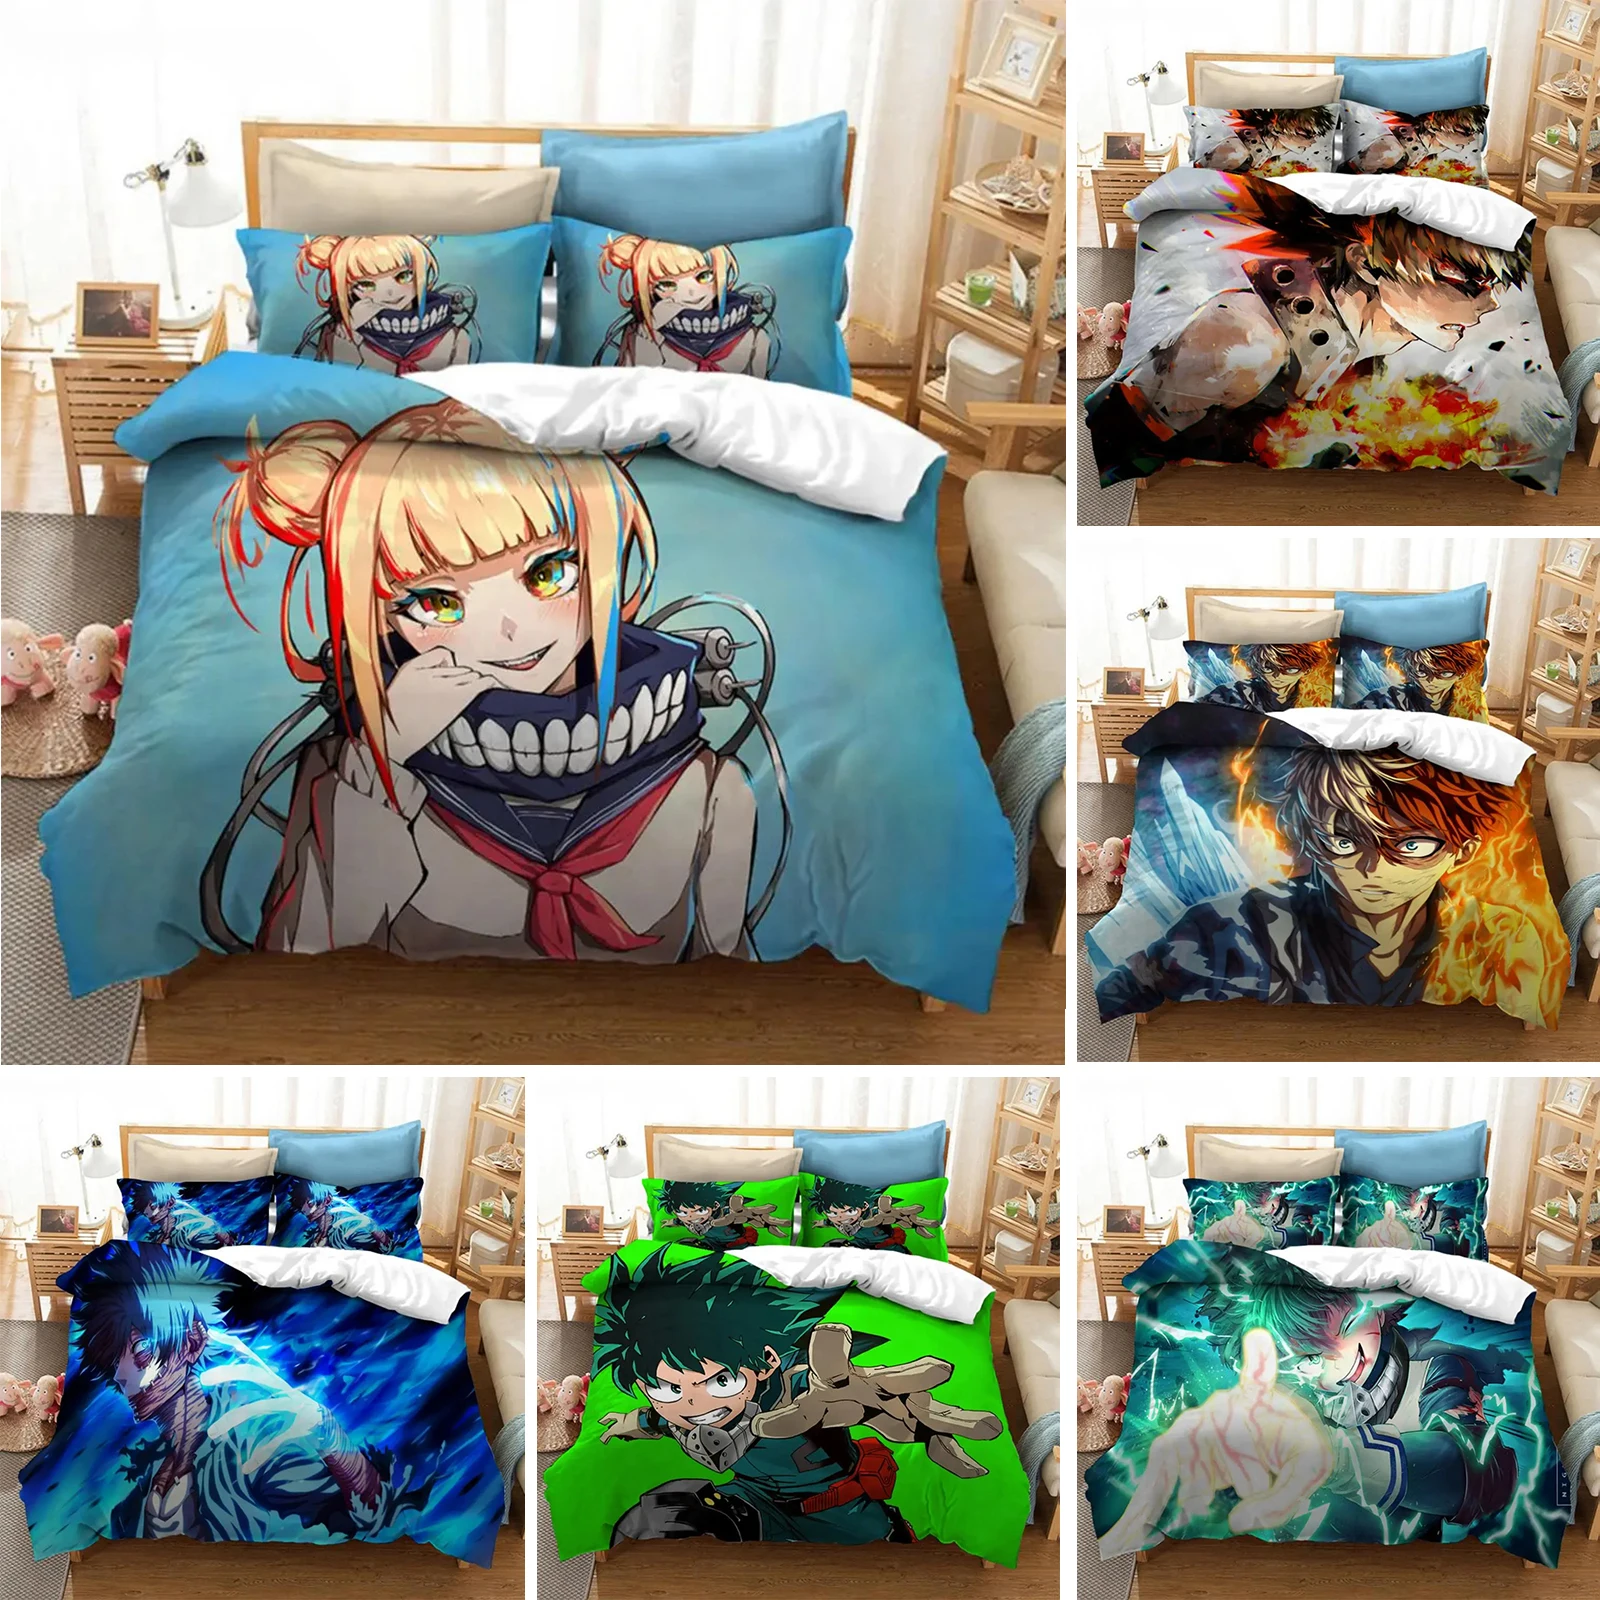 

Anime My Hero Academia Bedding Set Boys Girls Twin Queen Size Duvet Cover Pillowcase Bed Kids Adult Fashion Home Textileextile